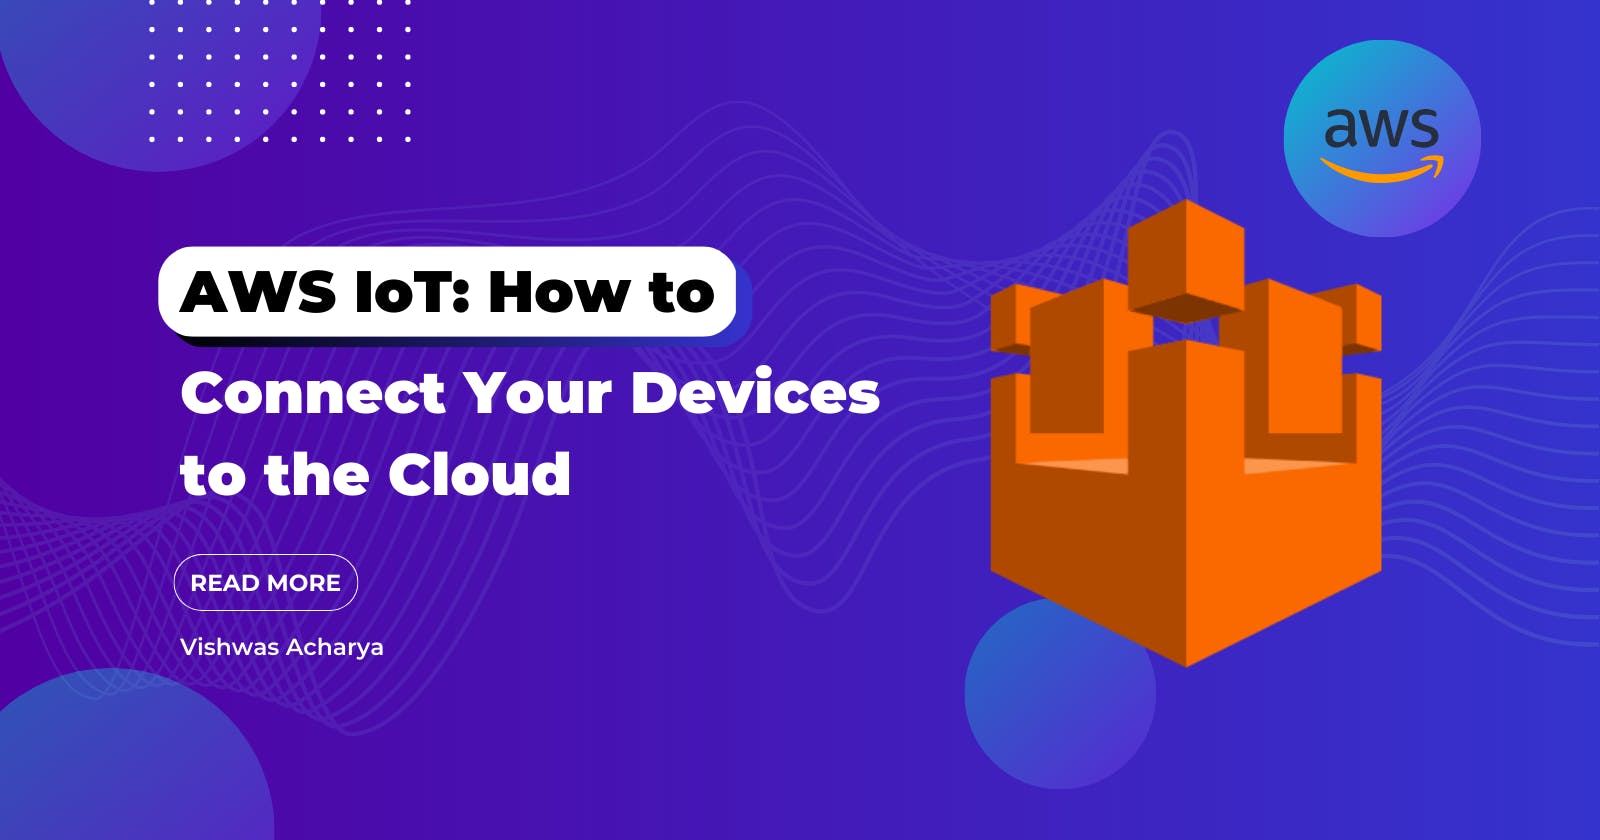 AWS IoT: How to Connect Your Devices to the Cloud